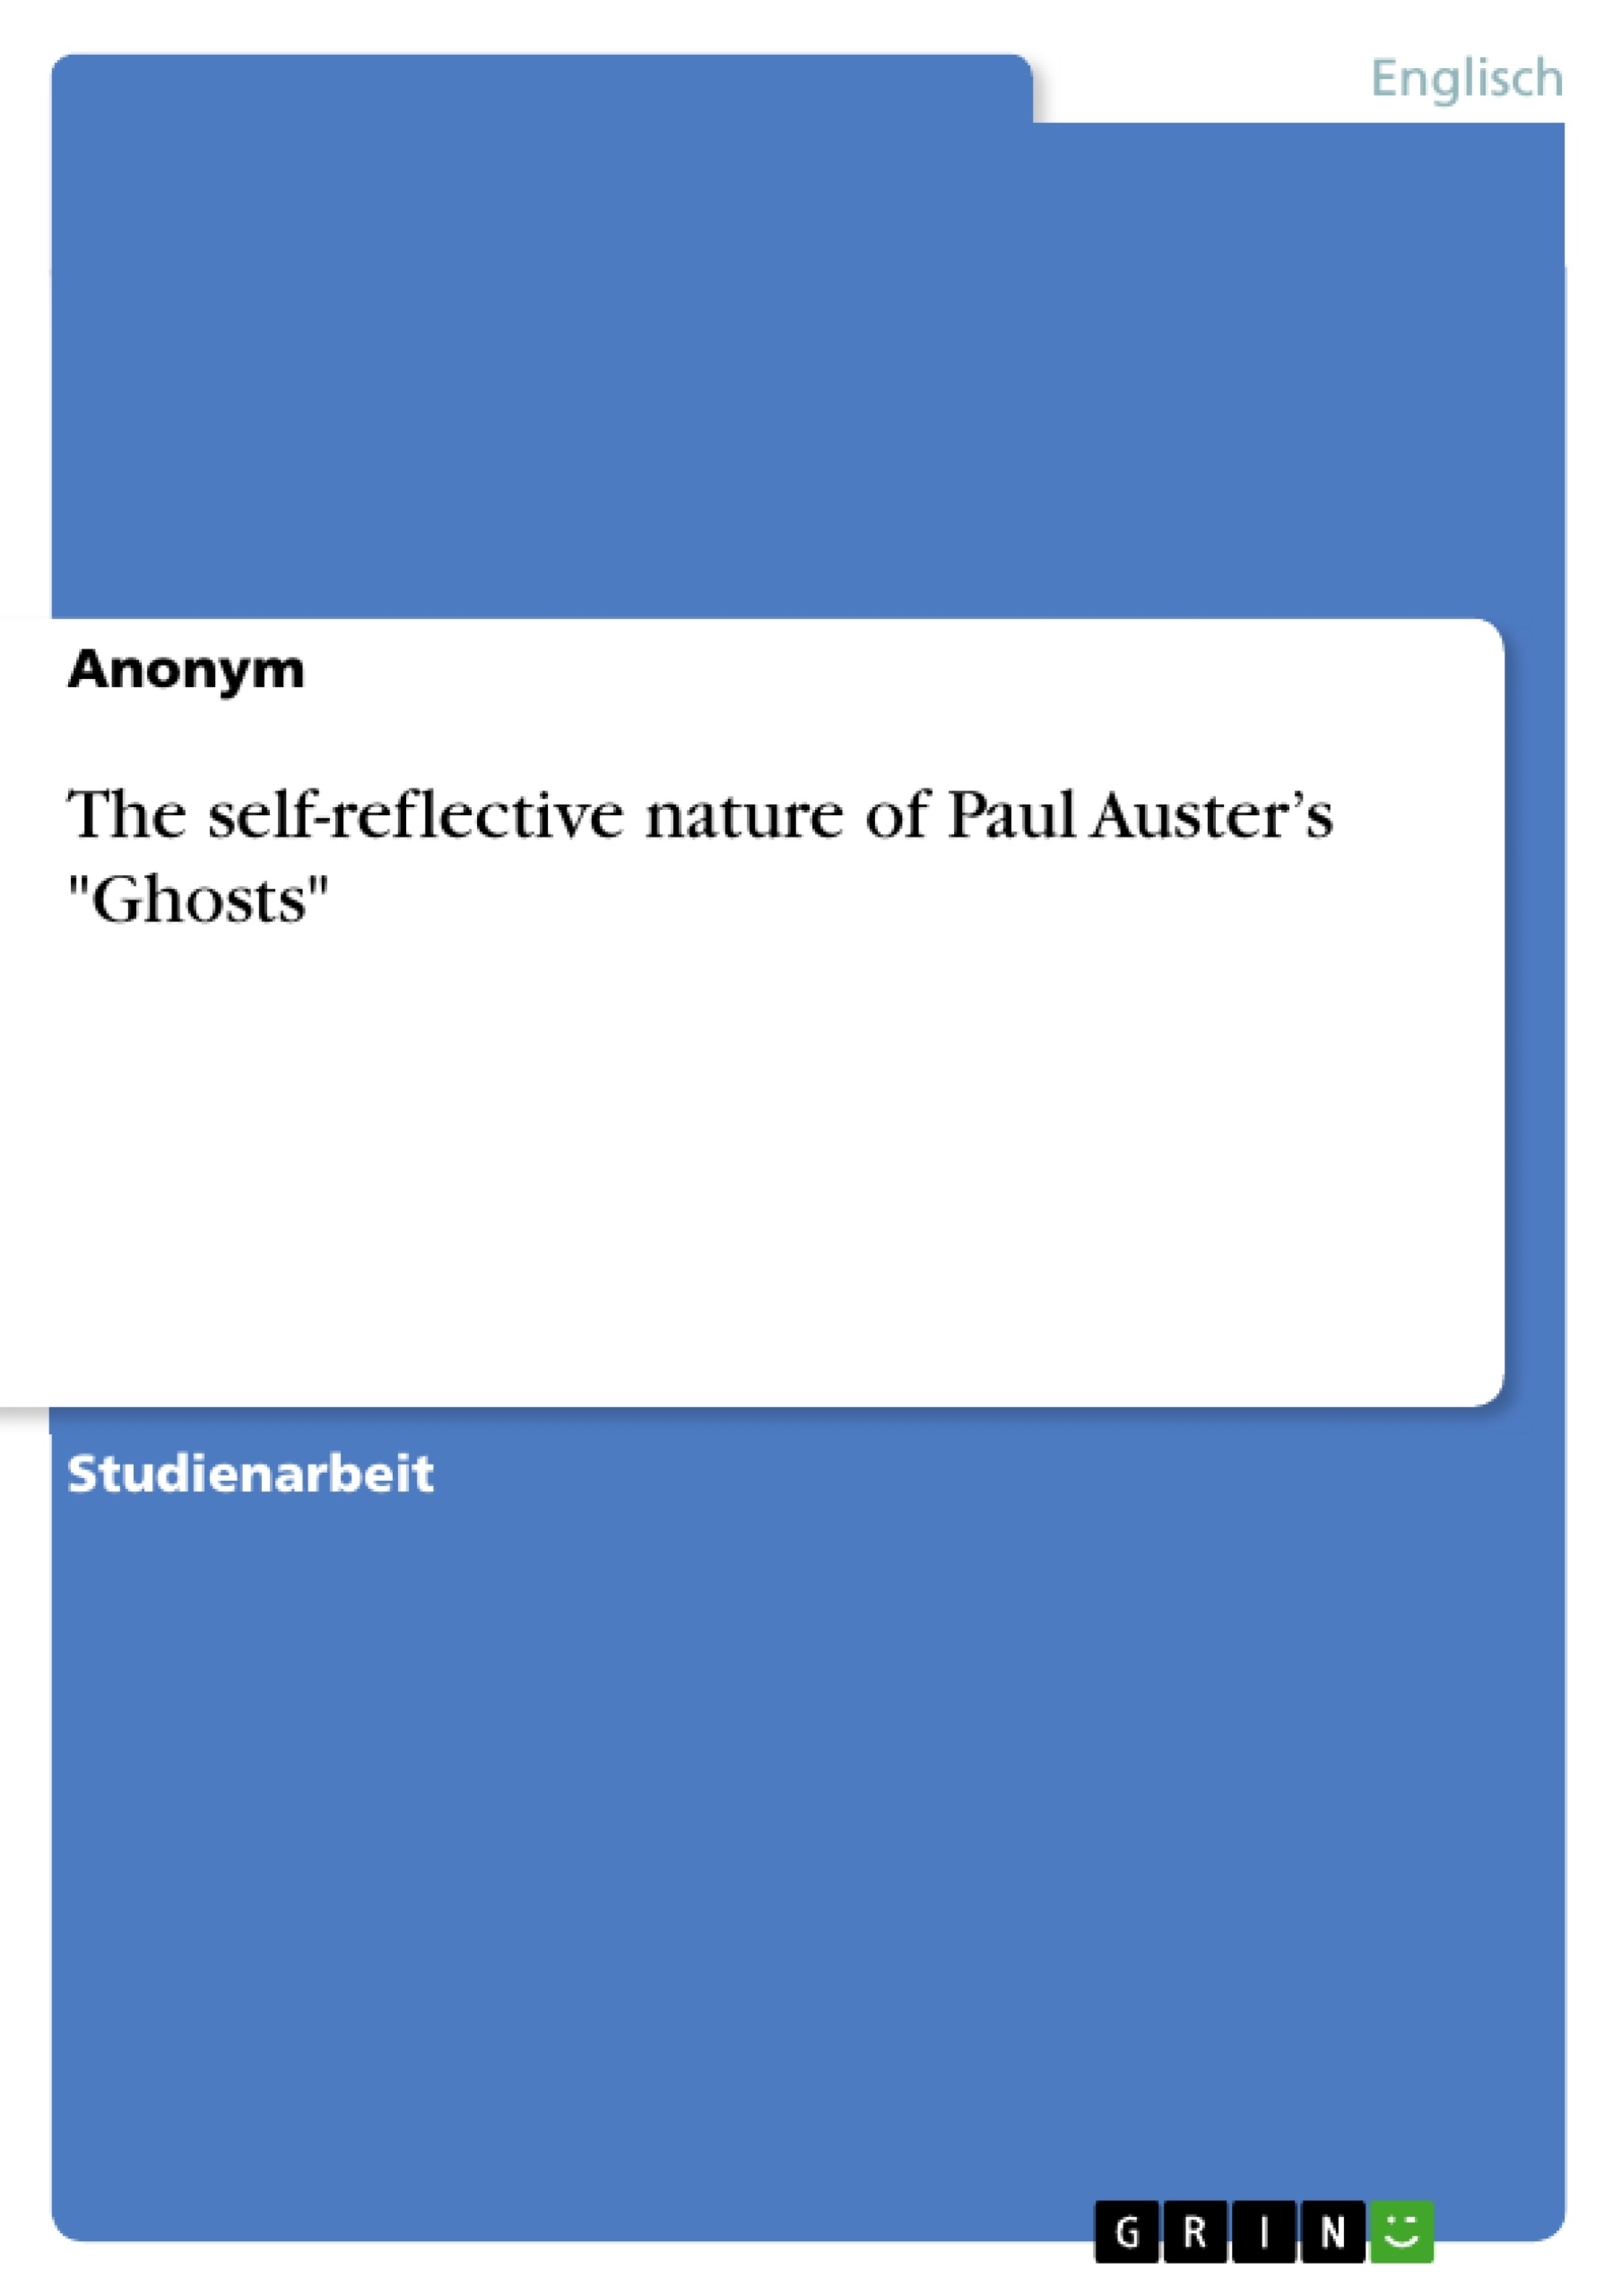 Titre: The self-reflective nature of Paul Auster’s "Ghosts"